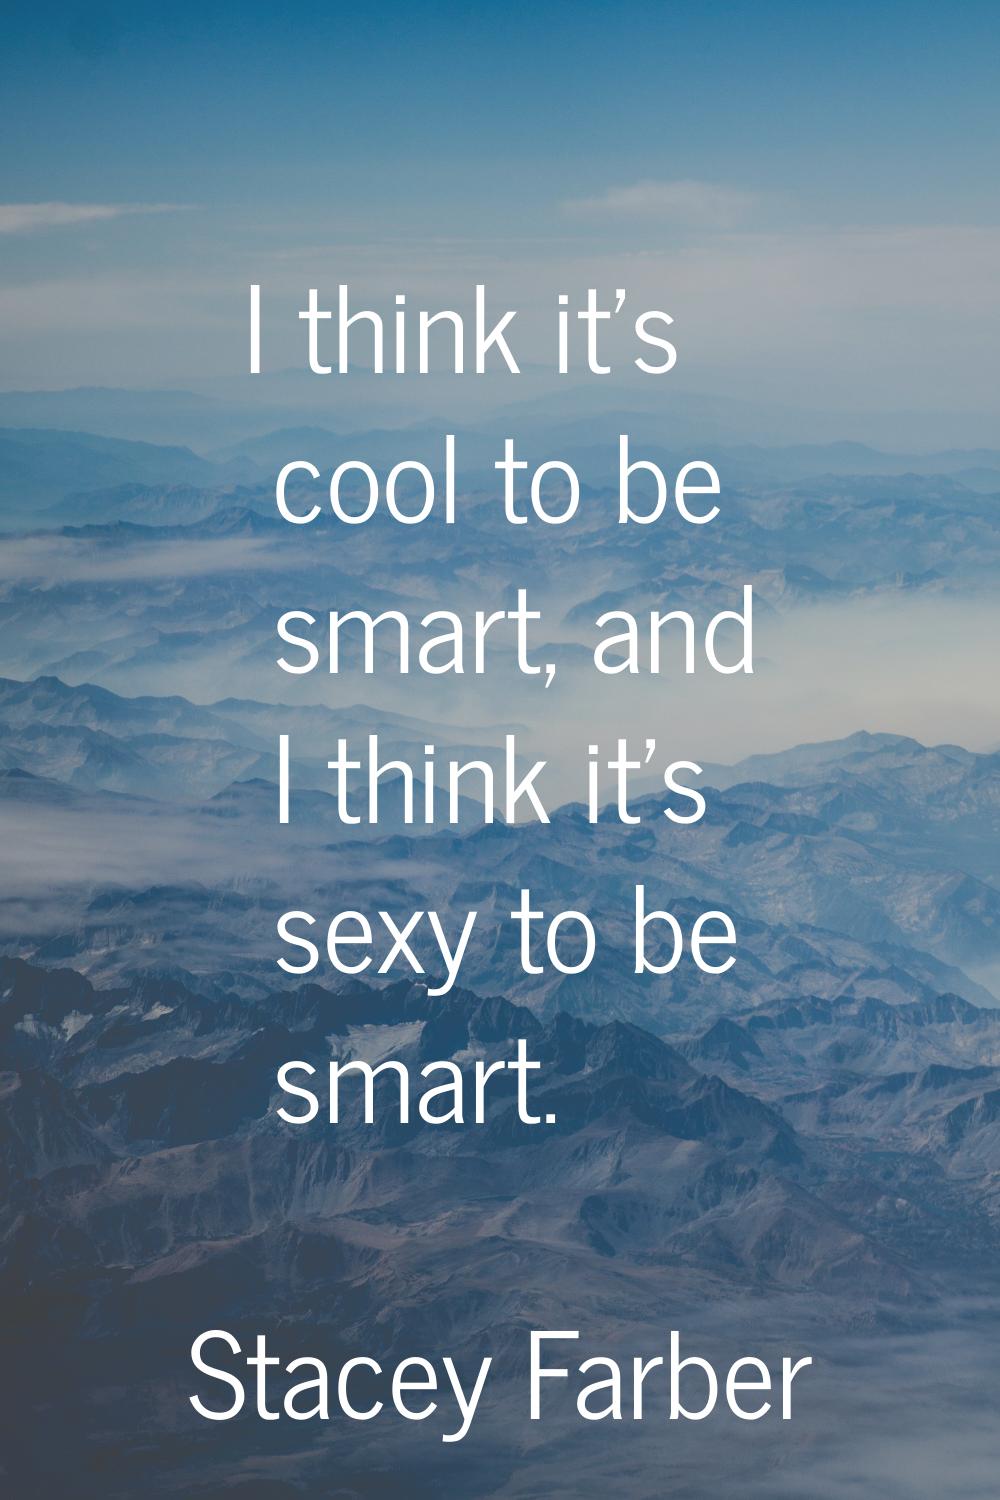 I think it's cool to be smart, and I think it's sexy to be smart.